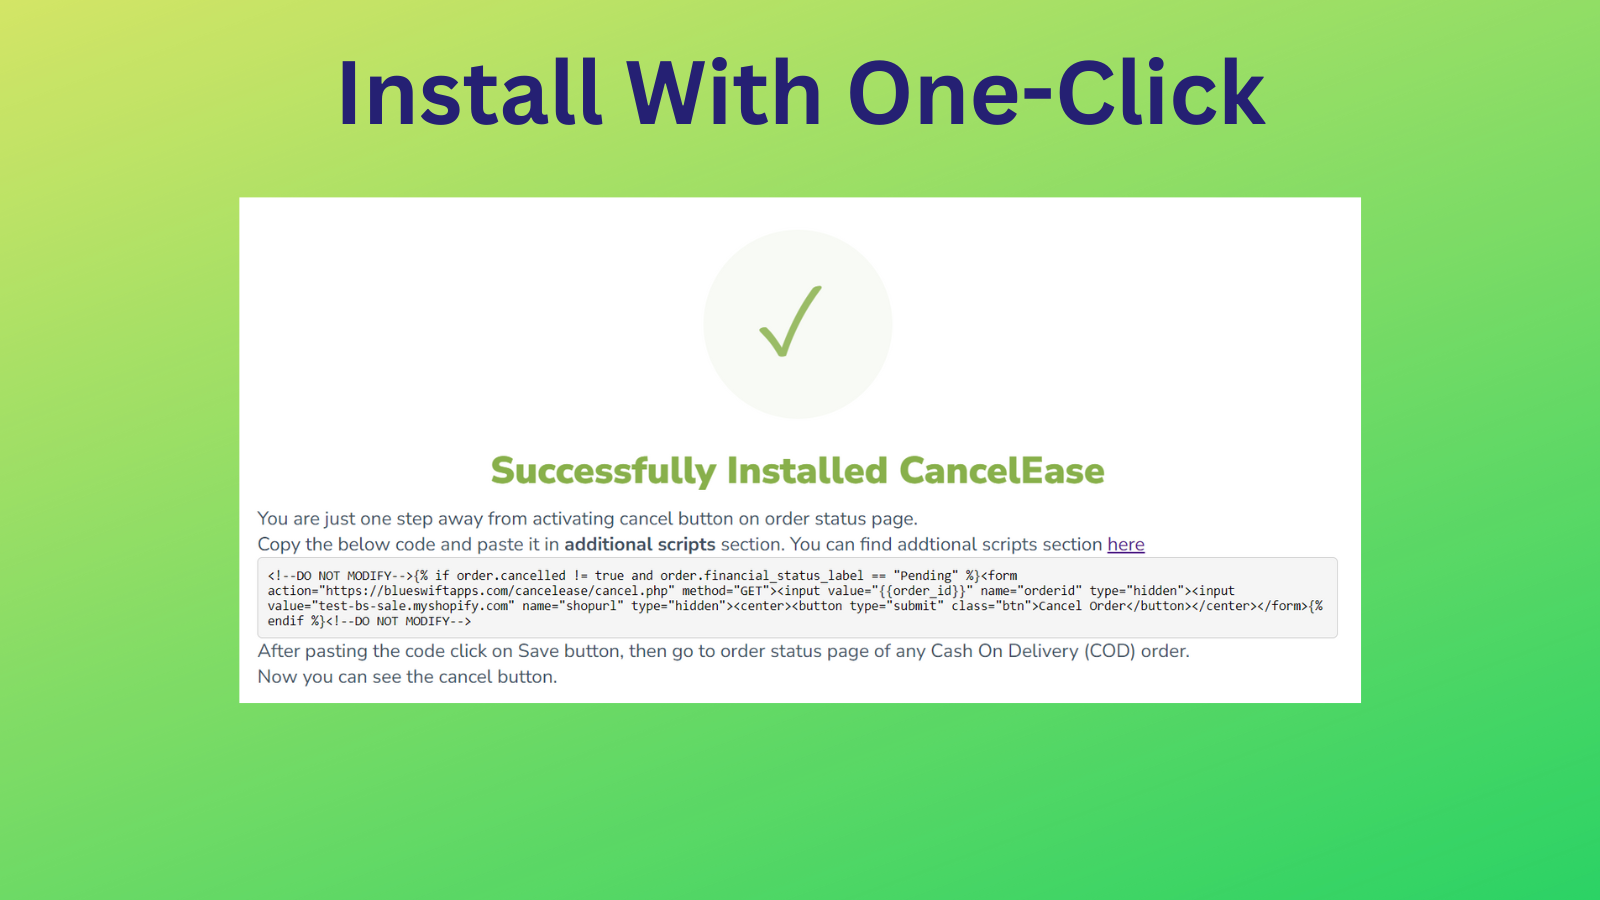 Install With One-Click